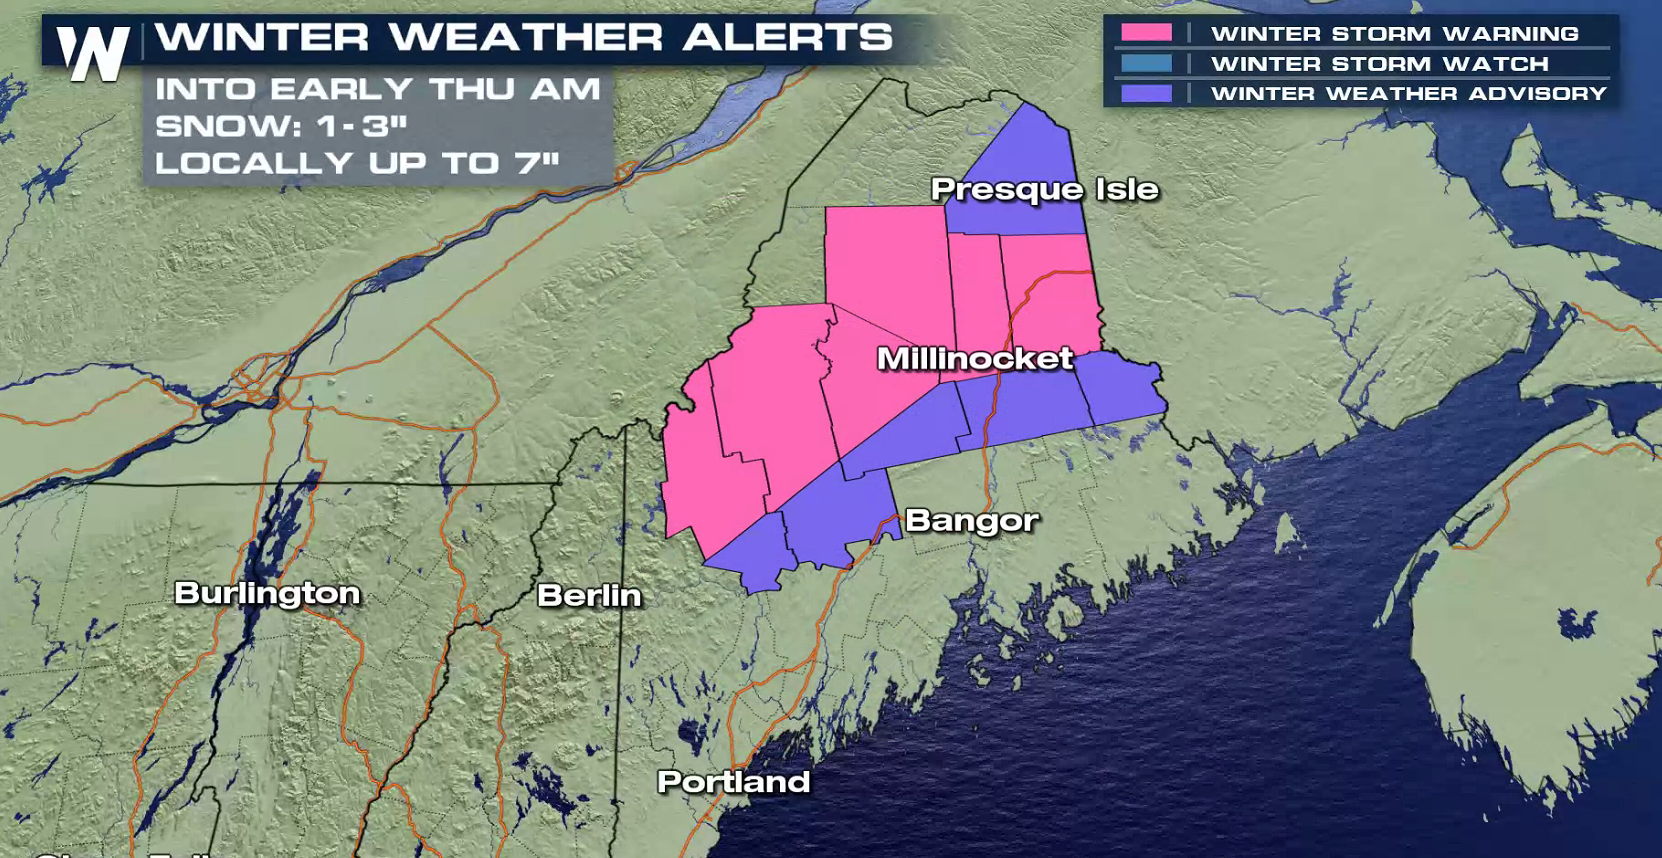 Significant Snow Ahead for Maine